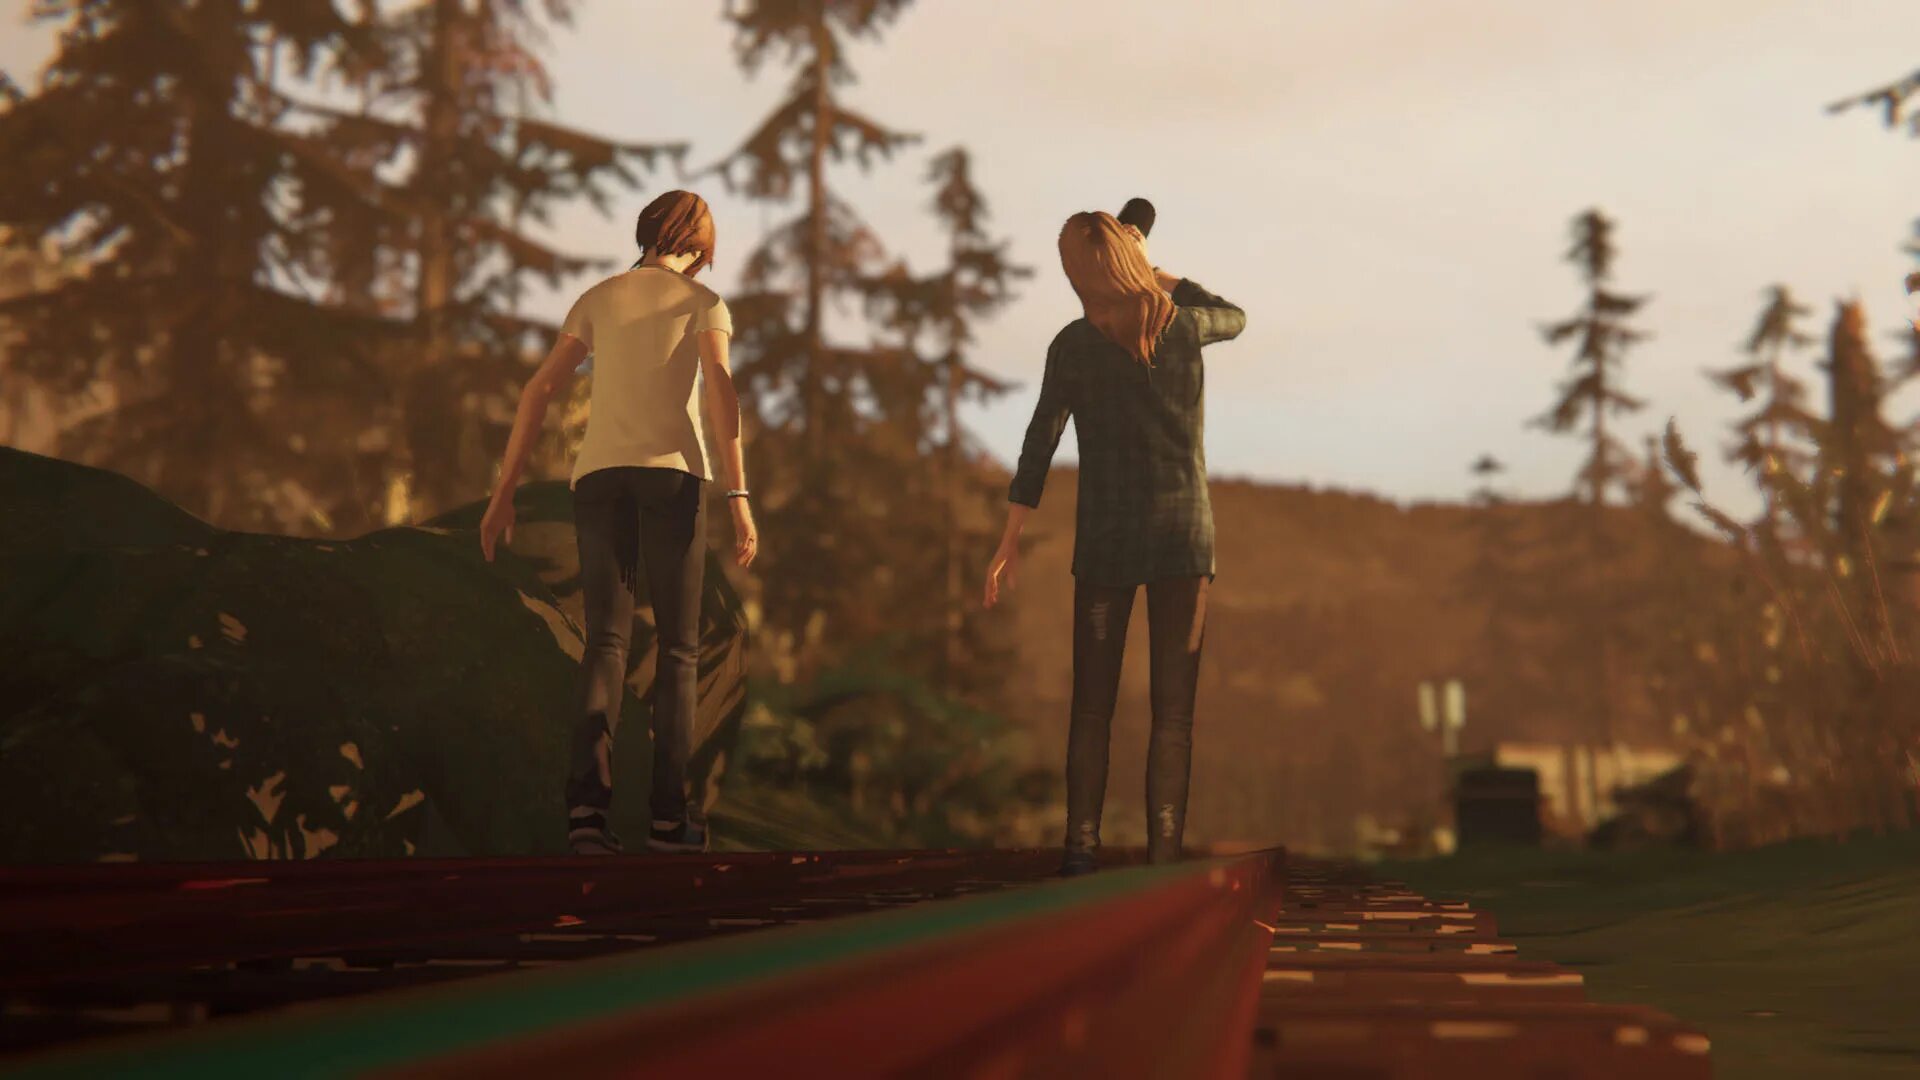 Life is either. Life is Strange: before the Storm. Life is Strange: before the Storm Wallpaper Рэйчел. Life is Strange before the Storm screenshots. Life is Strange BTS.